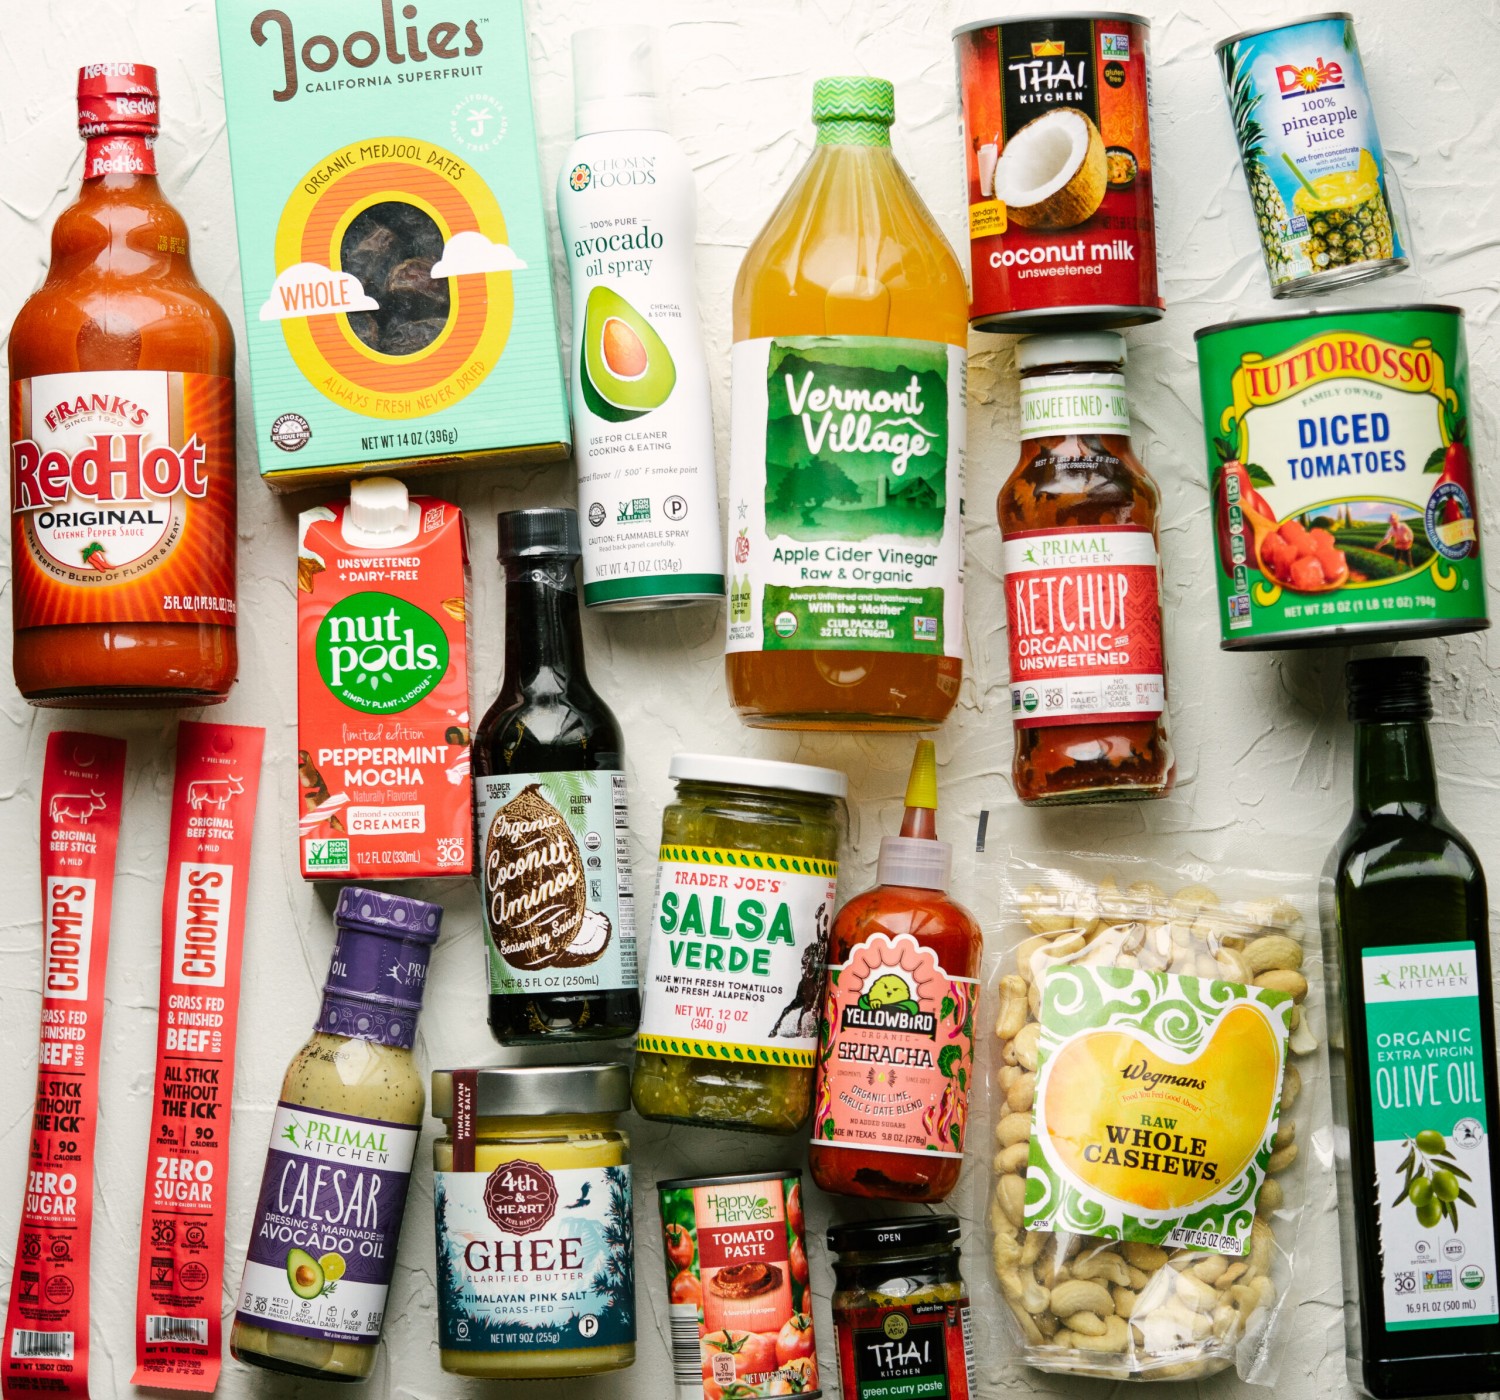 Whole30 Pantry Staples